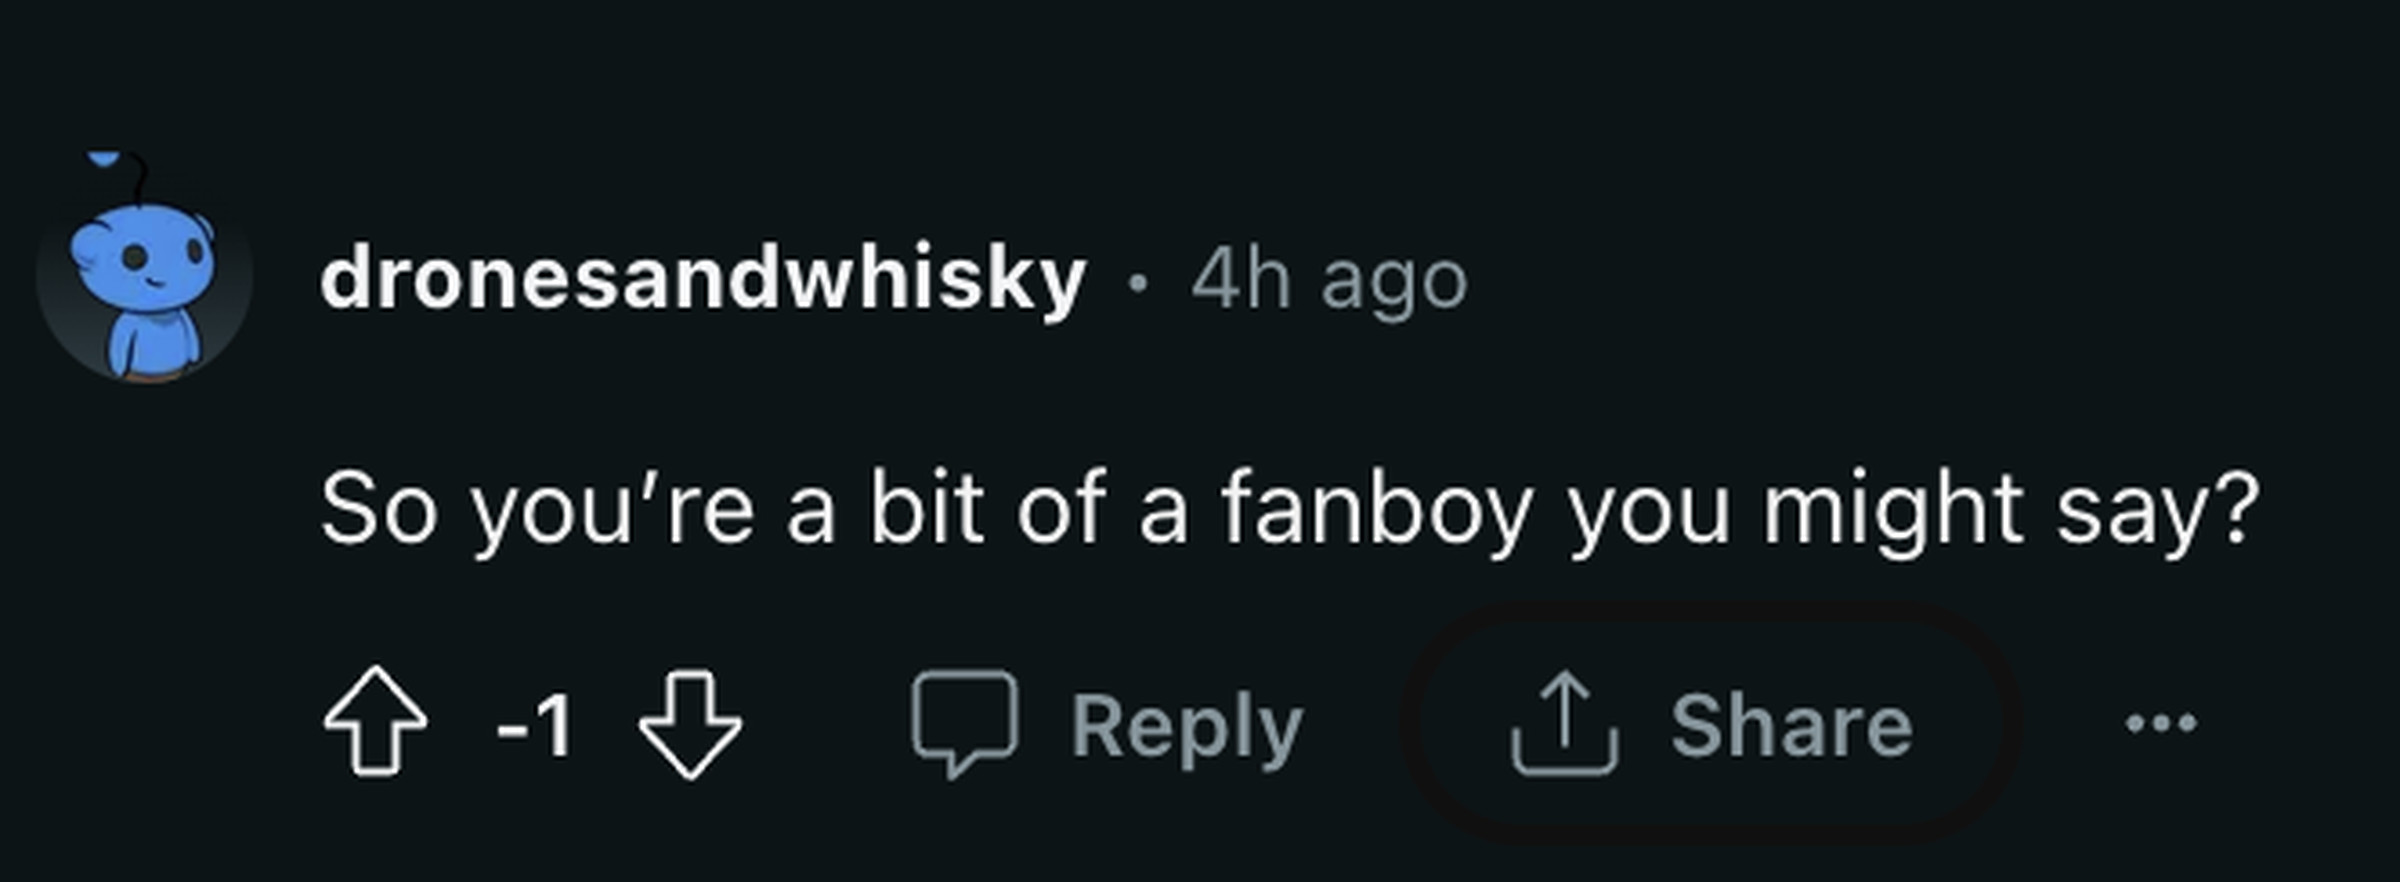 Comment reading “So you’re a bit of a fanboy you might say?”